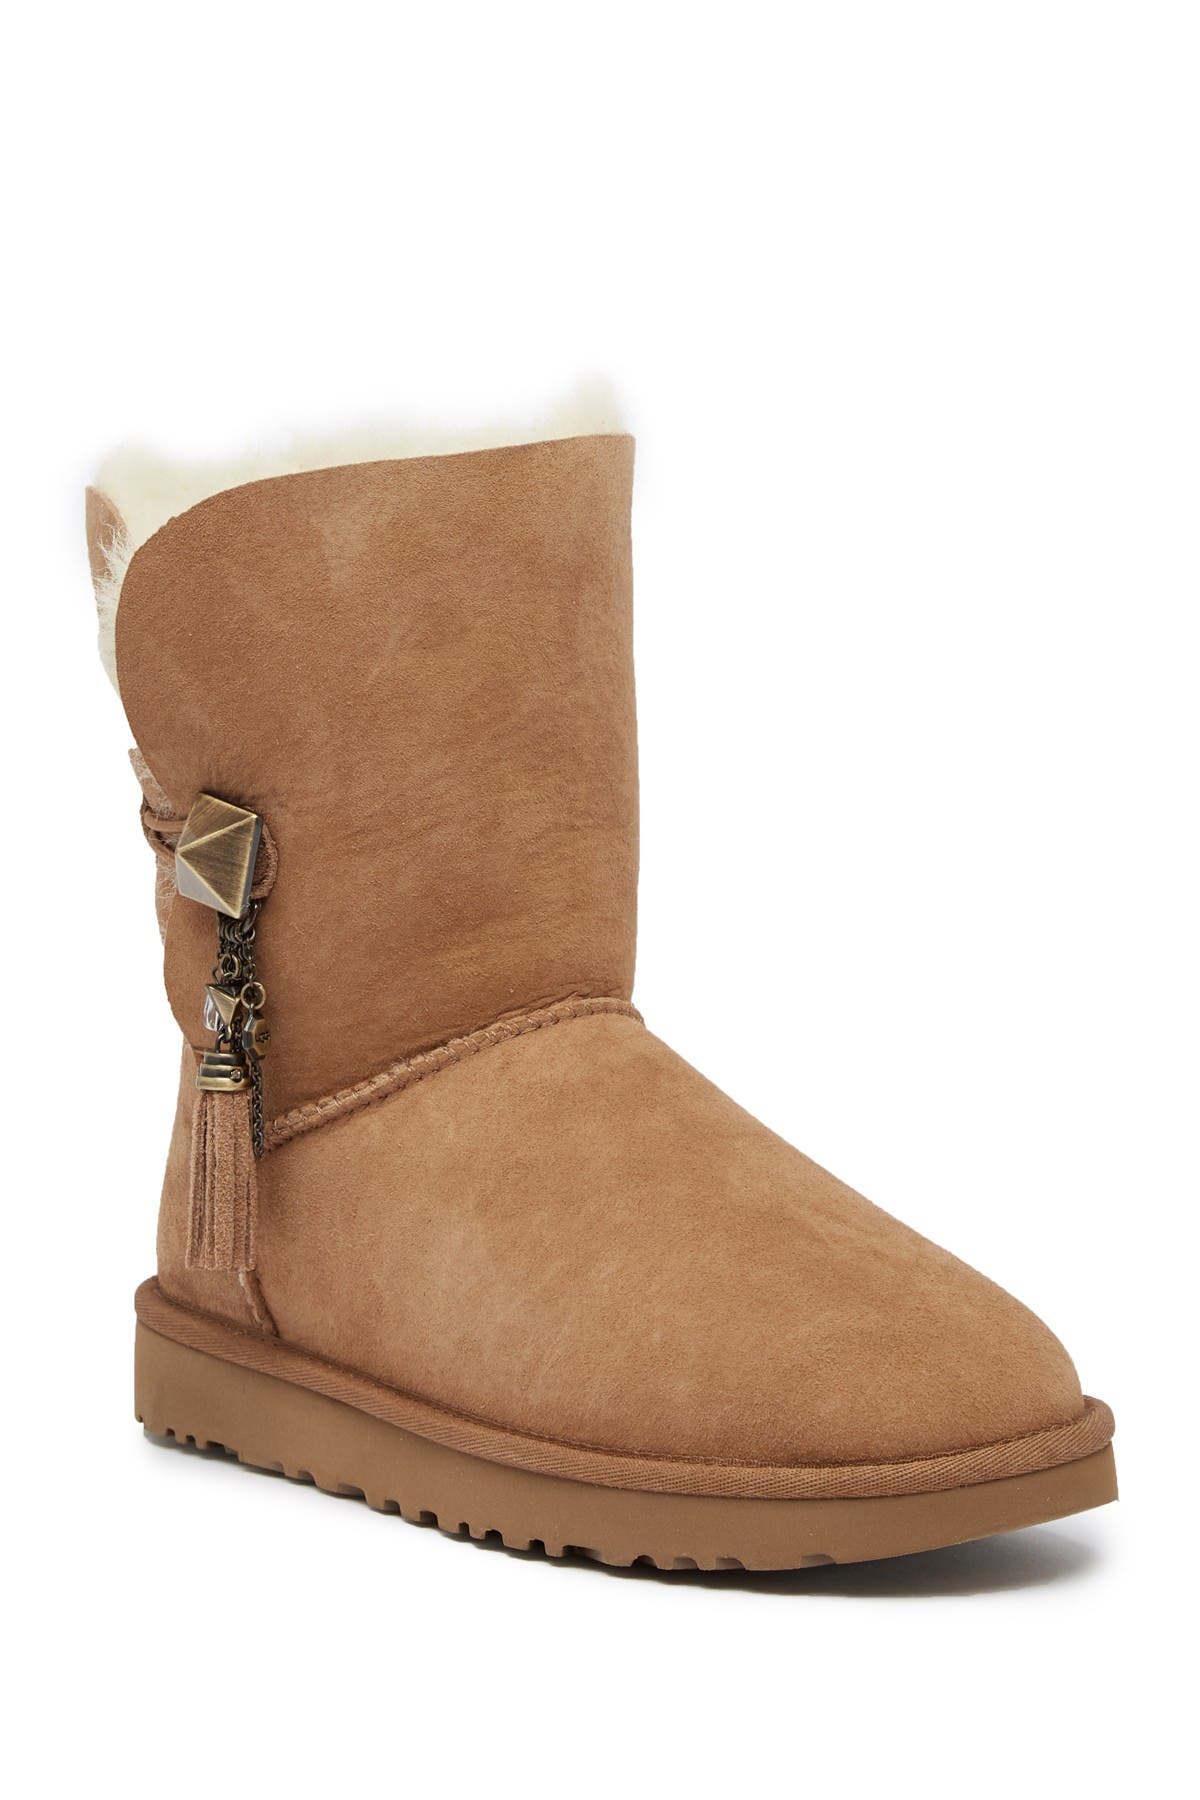 ugg lilou bootie